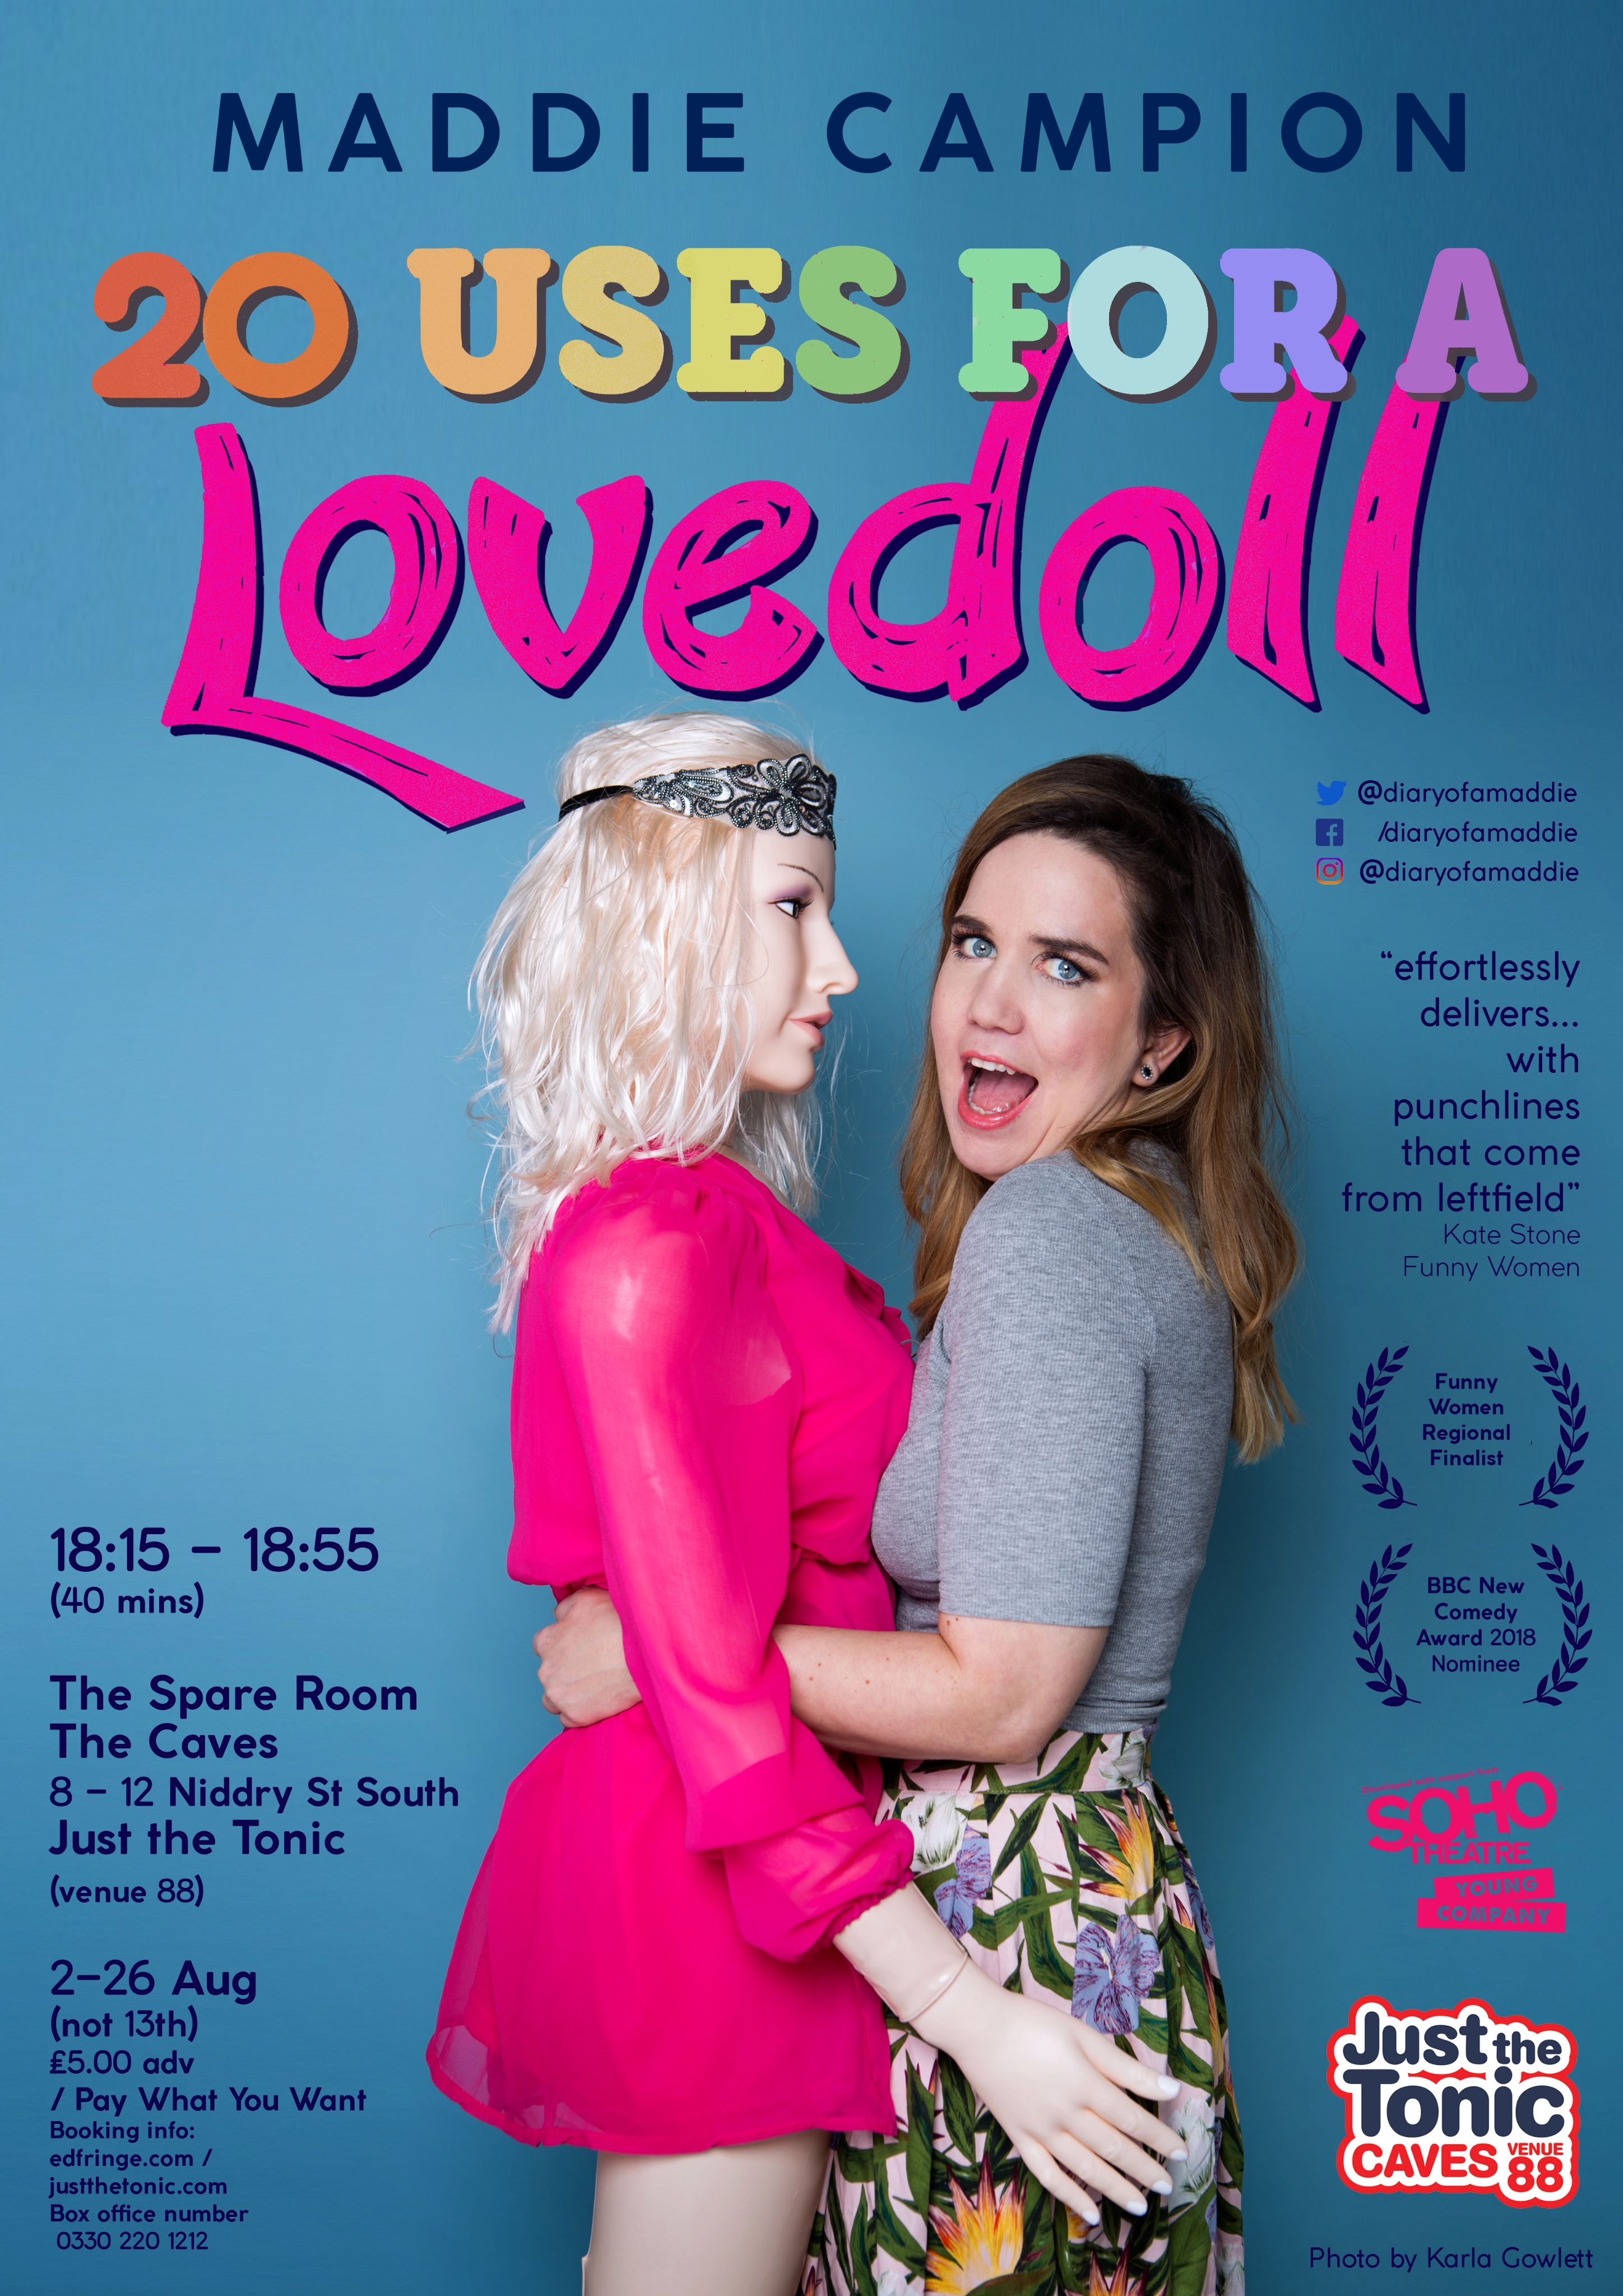 The poster for Maddie Campion: 20 Uses for a Lovedoll